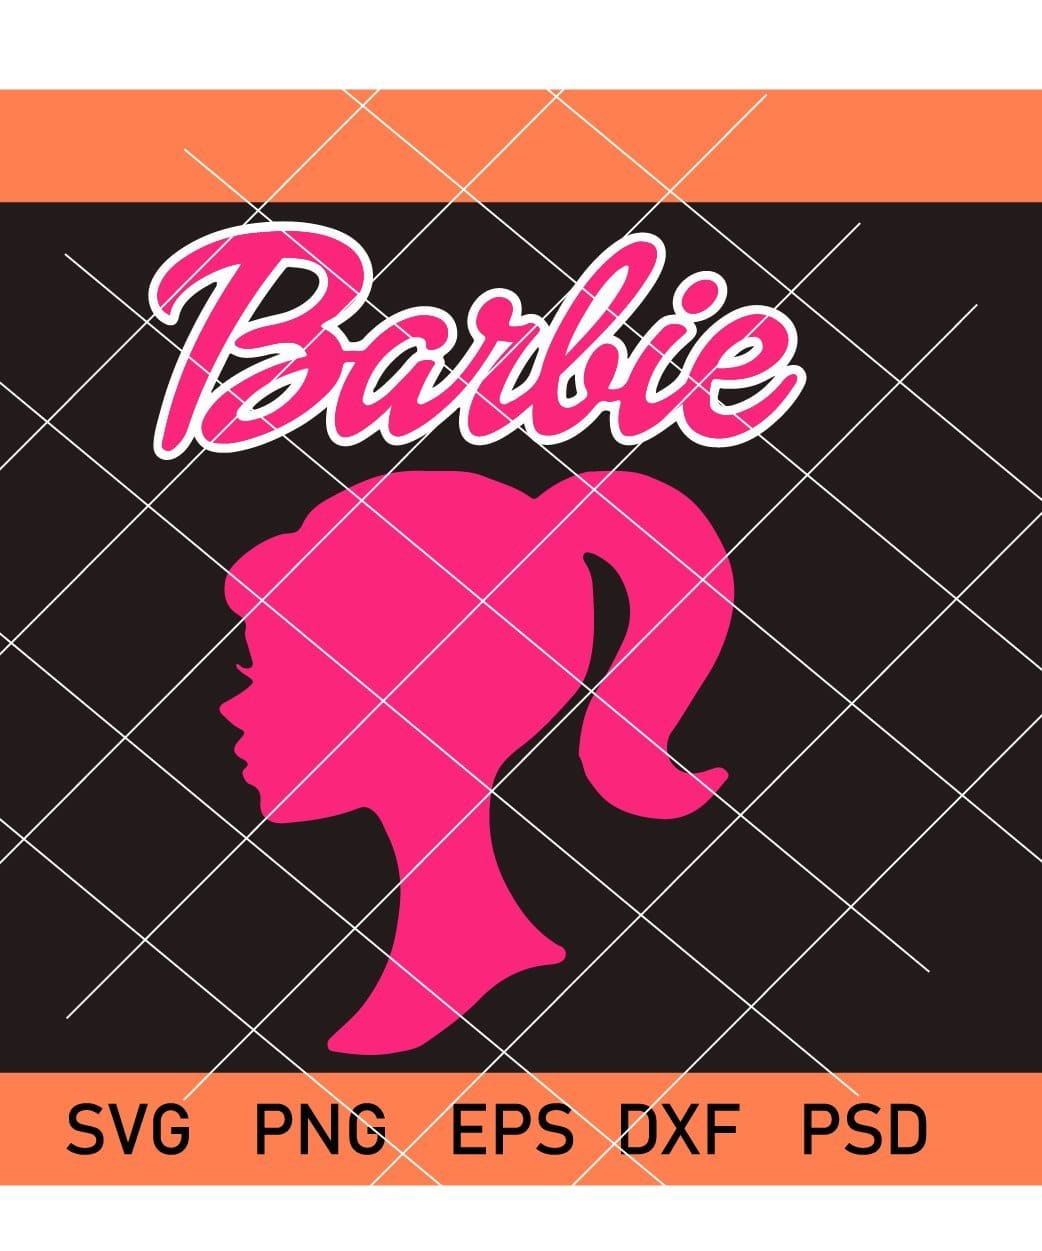 Download Barbie Svg Barbie Silhouettes Svg Cut File For Silhouette Cameo Or Cricut Svg Hubs